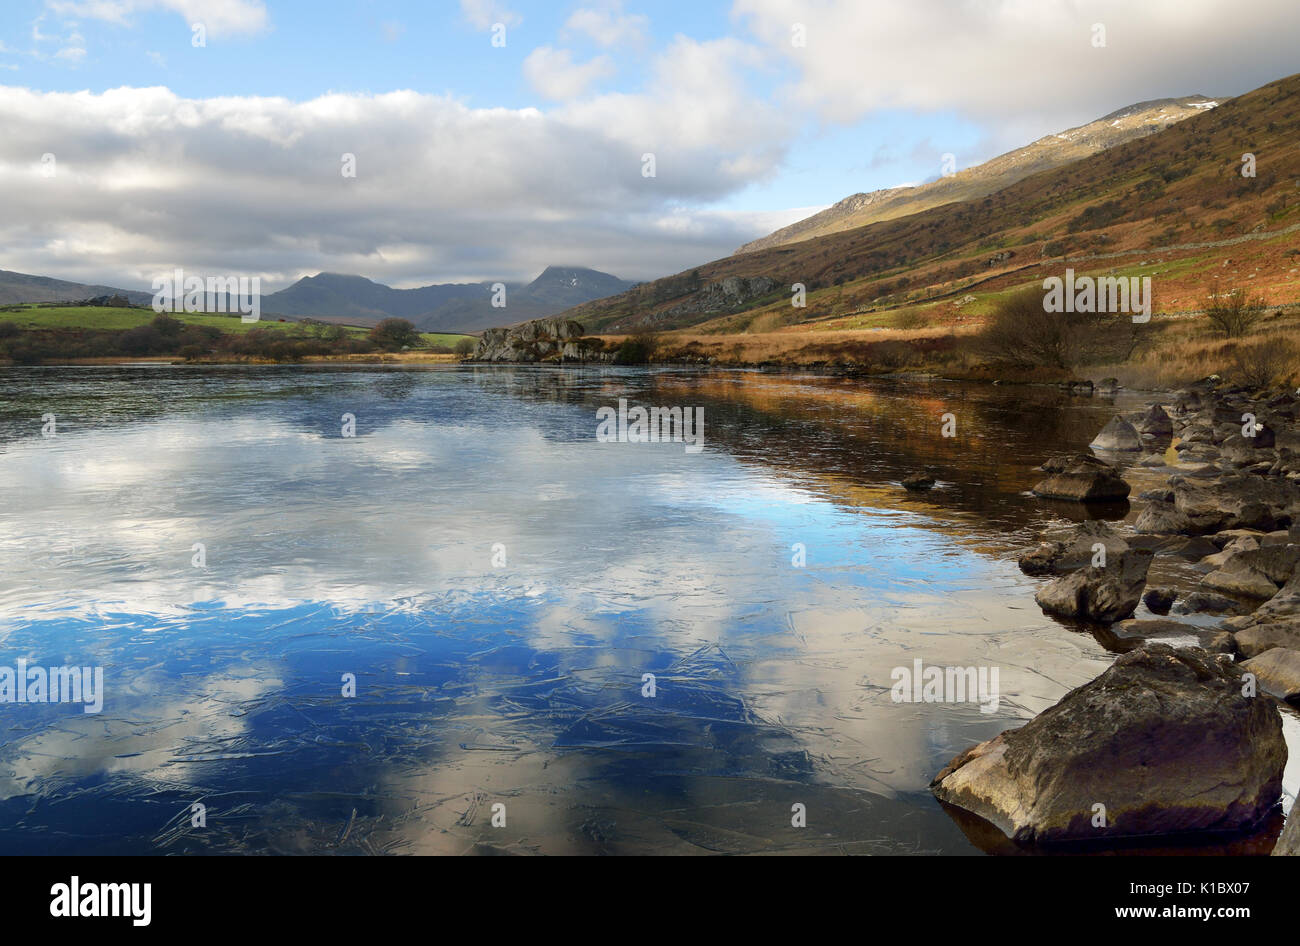 Llynnau Mymbyr are two lakes located in Dyffryn Mymbyr valley in Snowdonia and are here seen with mount Snowdon in the background. Stock Photo